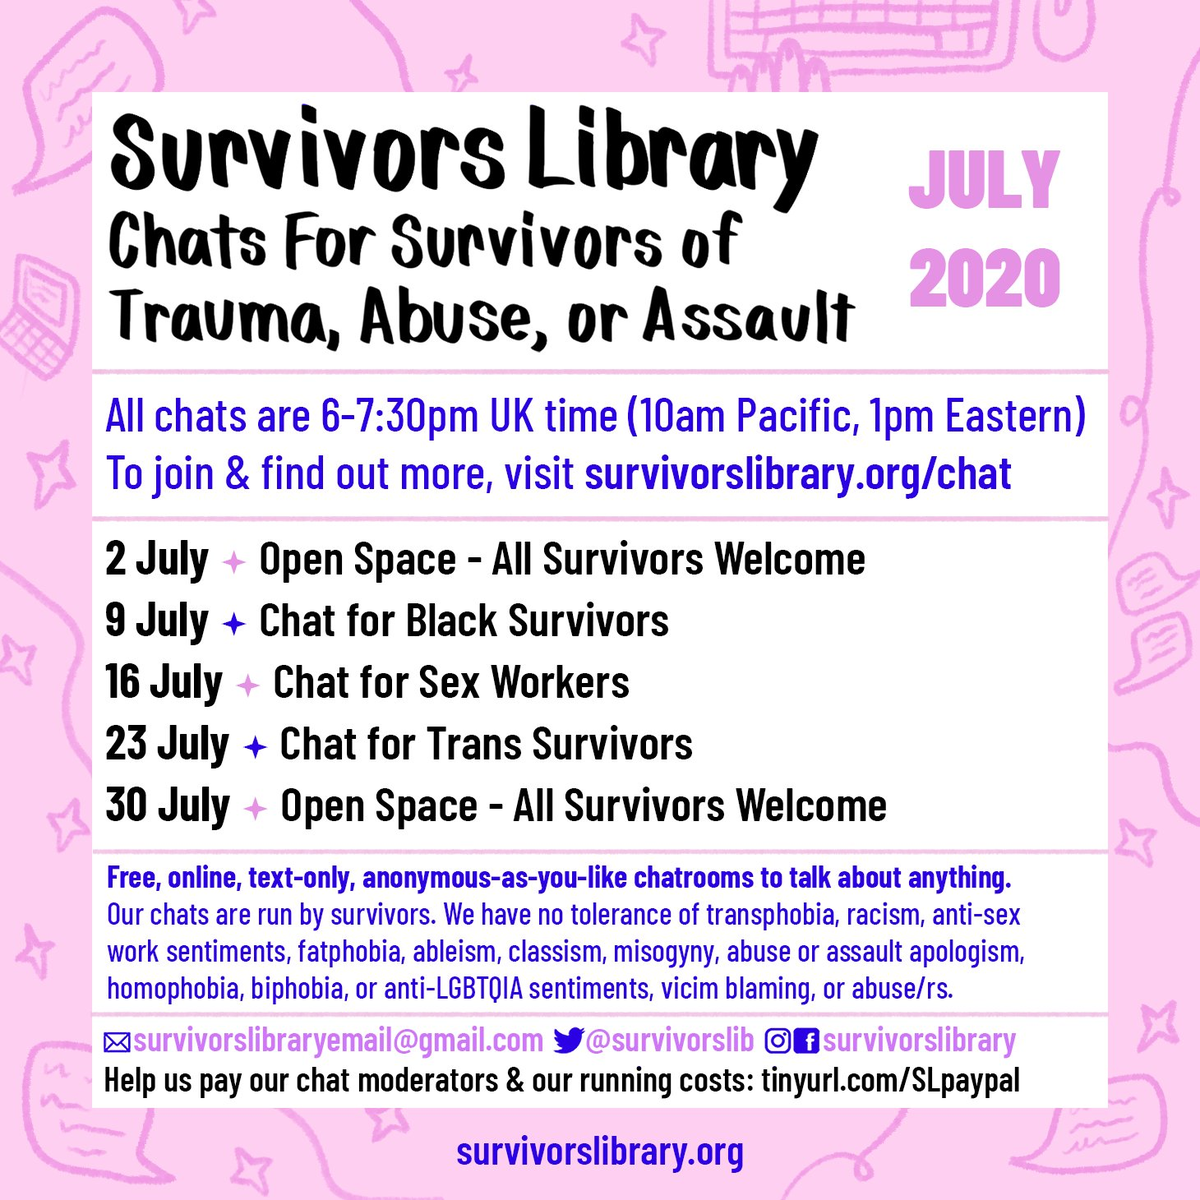 26. Survivors Library -  @survivorslib A collective of survivors of trauma, abuse, & assault building a radical library and providing mutual aid and support.Their online sessions during lockdown have been world-class.PLEASE DONATE GENEROUSLY:  http://tinyurl.com/SLpaypal 